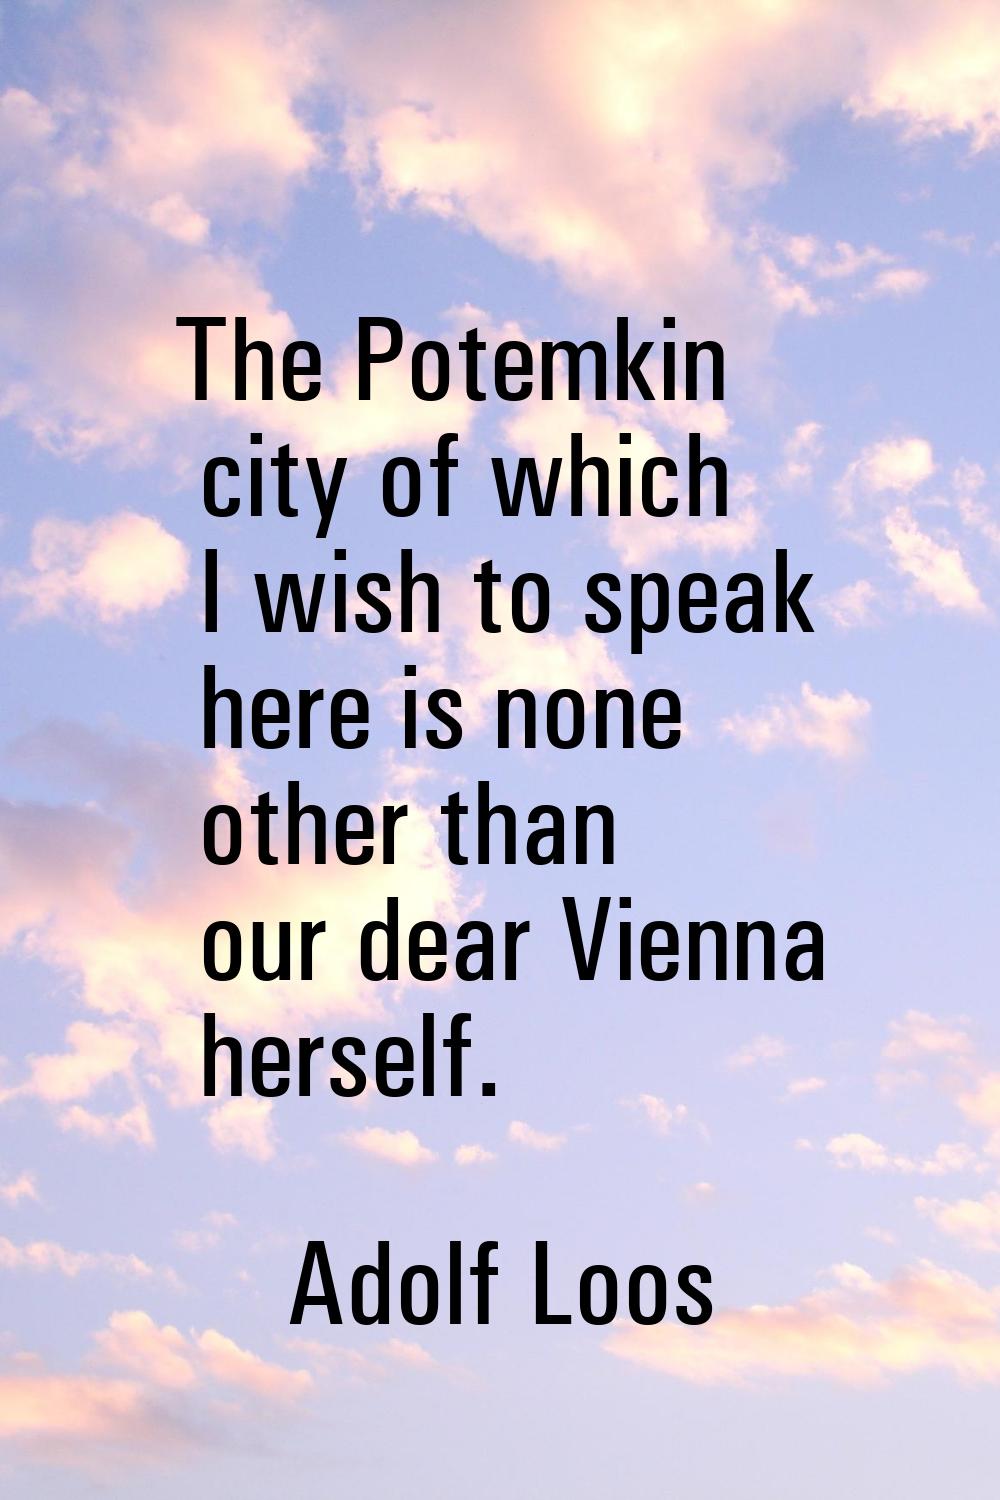 The Potemkin city of which I wish to speak here is none other than our dear Vienna herself.